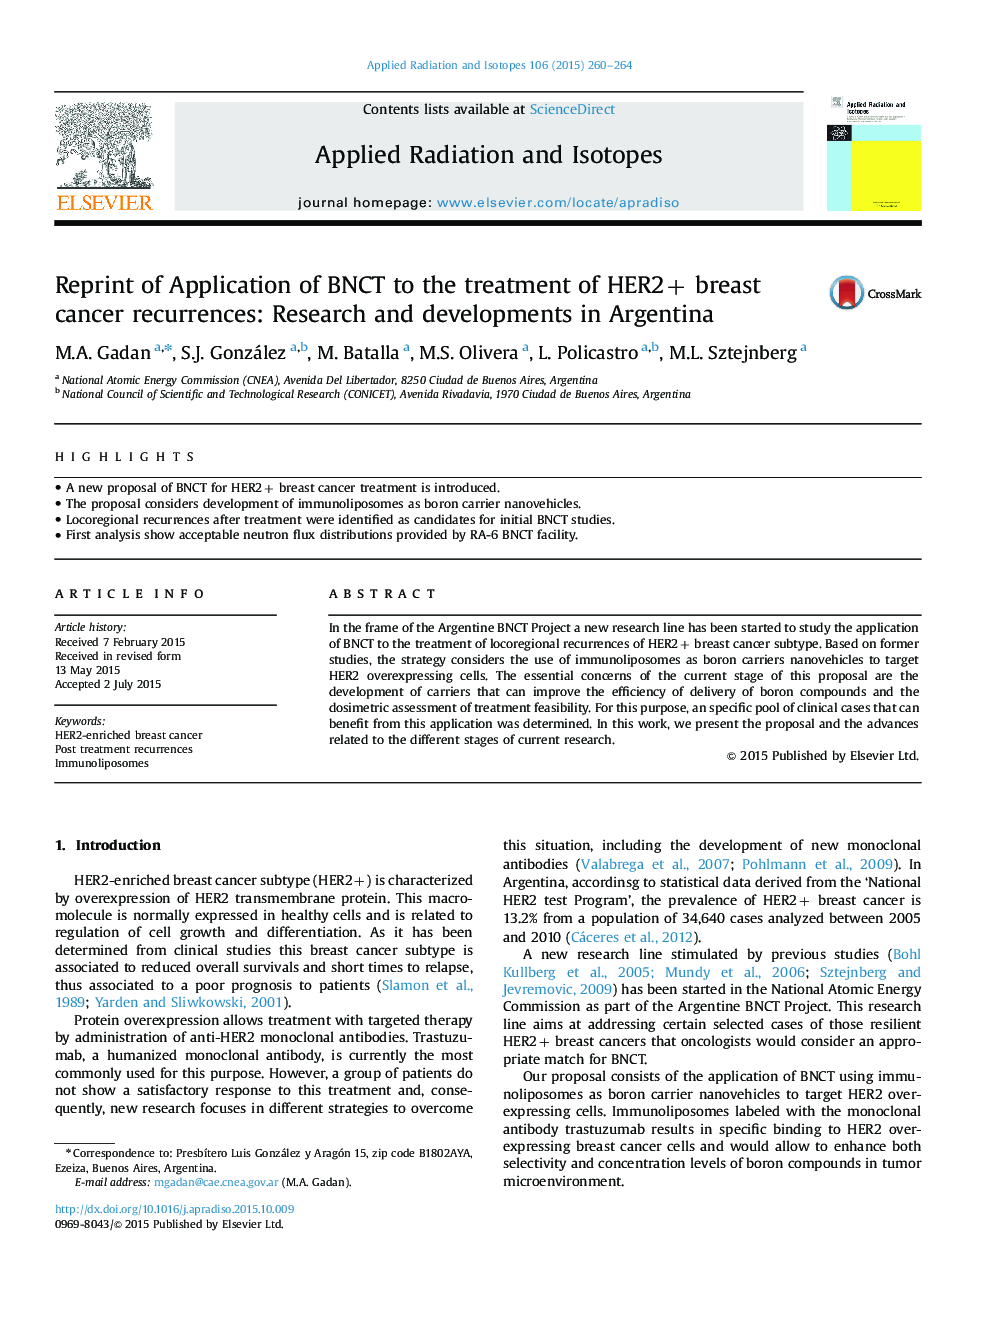 Reprint of Application of BNCT to the treatment of HER2+ breast cancer recurrences: Research and developments in Argentina